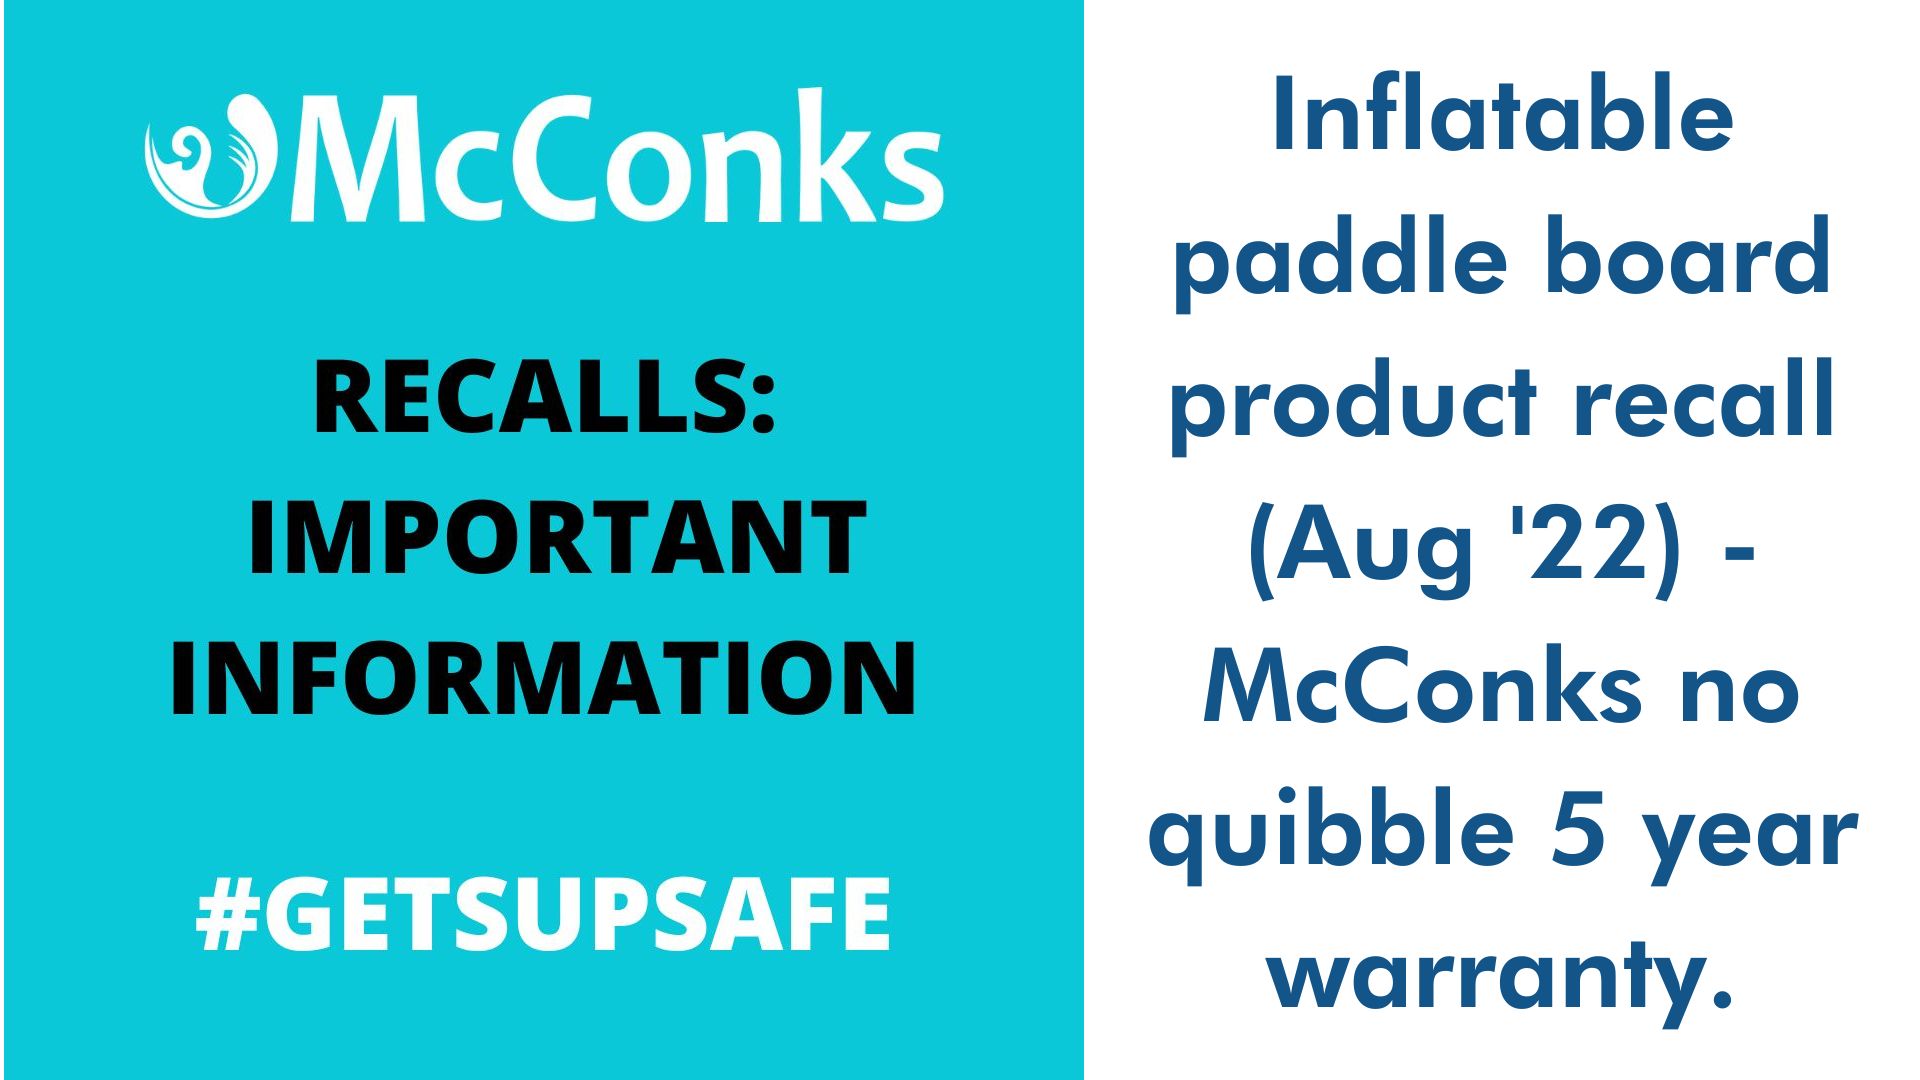 You are currently viewing Inflatable paddle board product recall (Aug ’22) – But not McConks- McConks no quibble 5 year warranty.